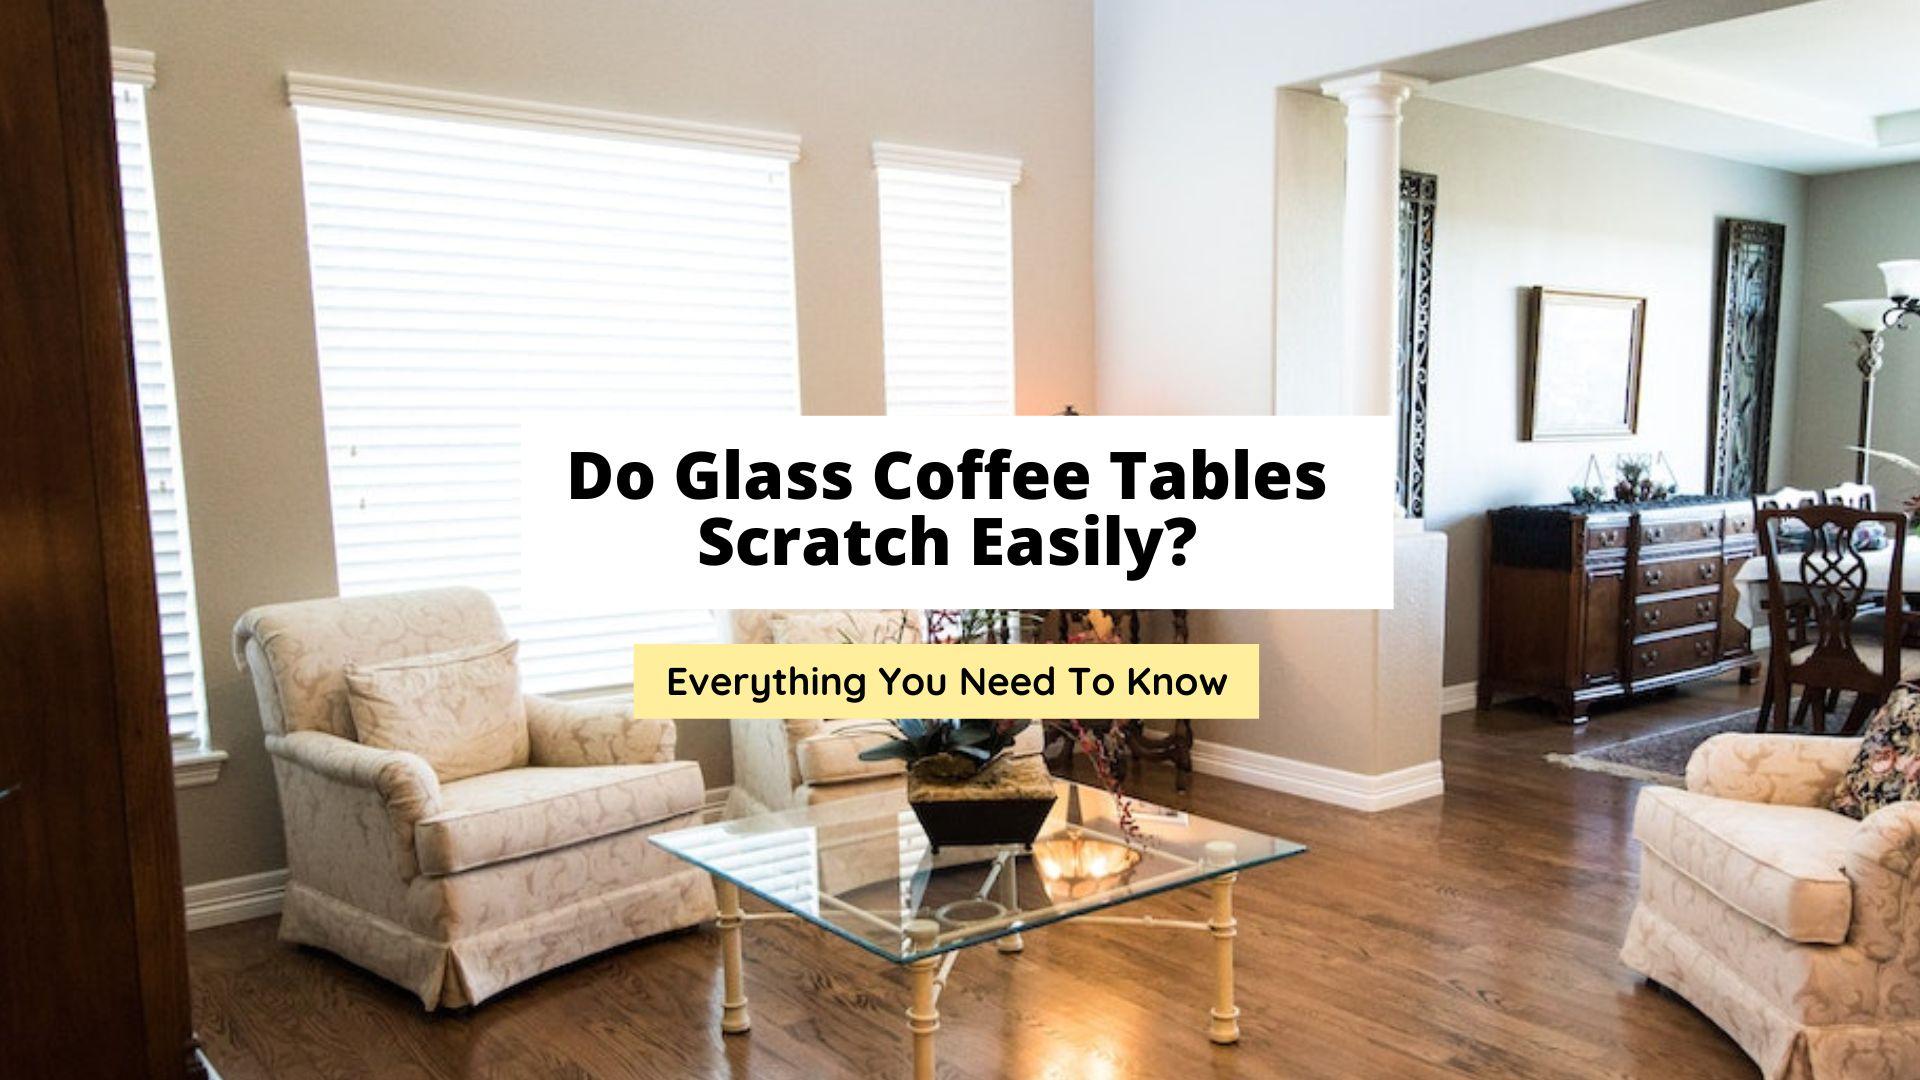 Do Glass Coffee Tables Scratch Easily